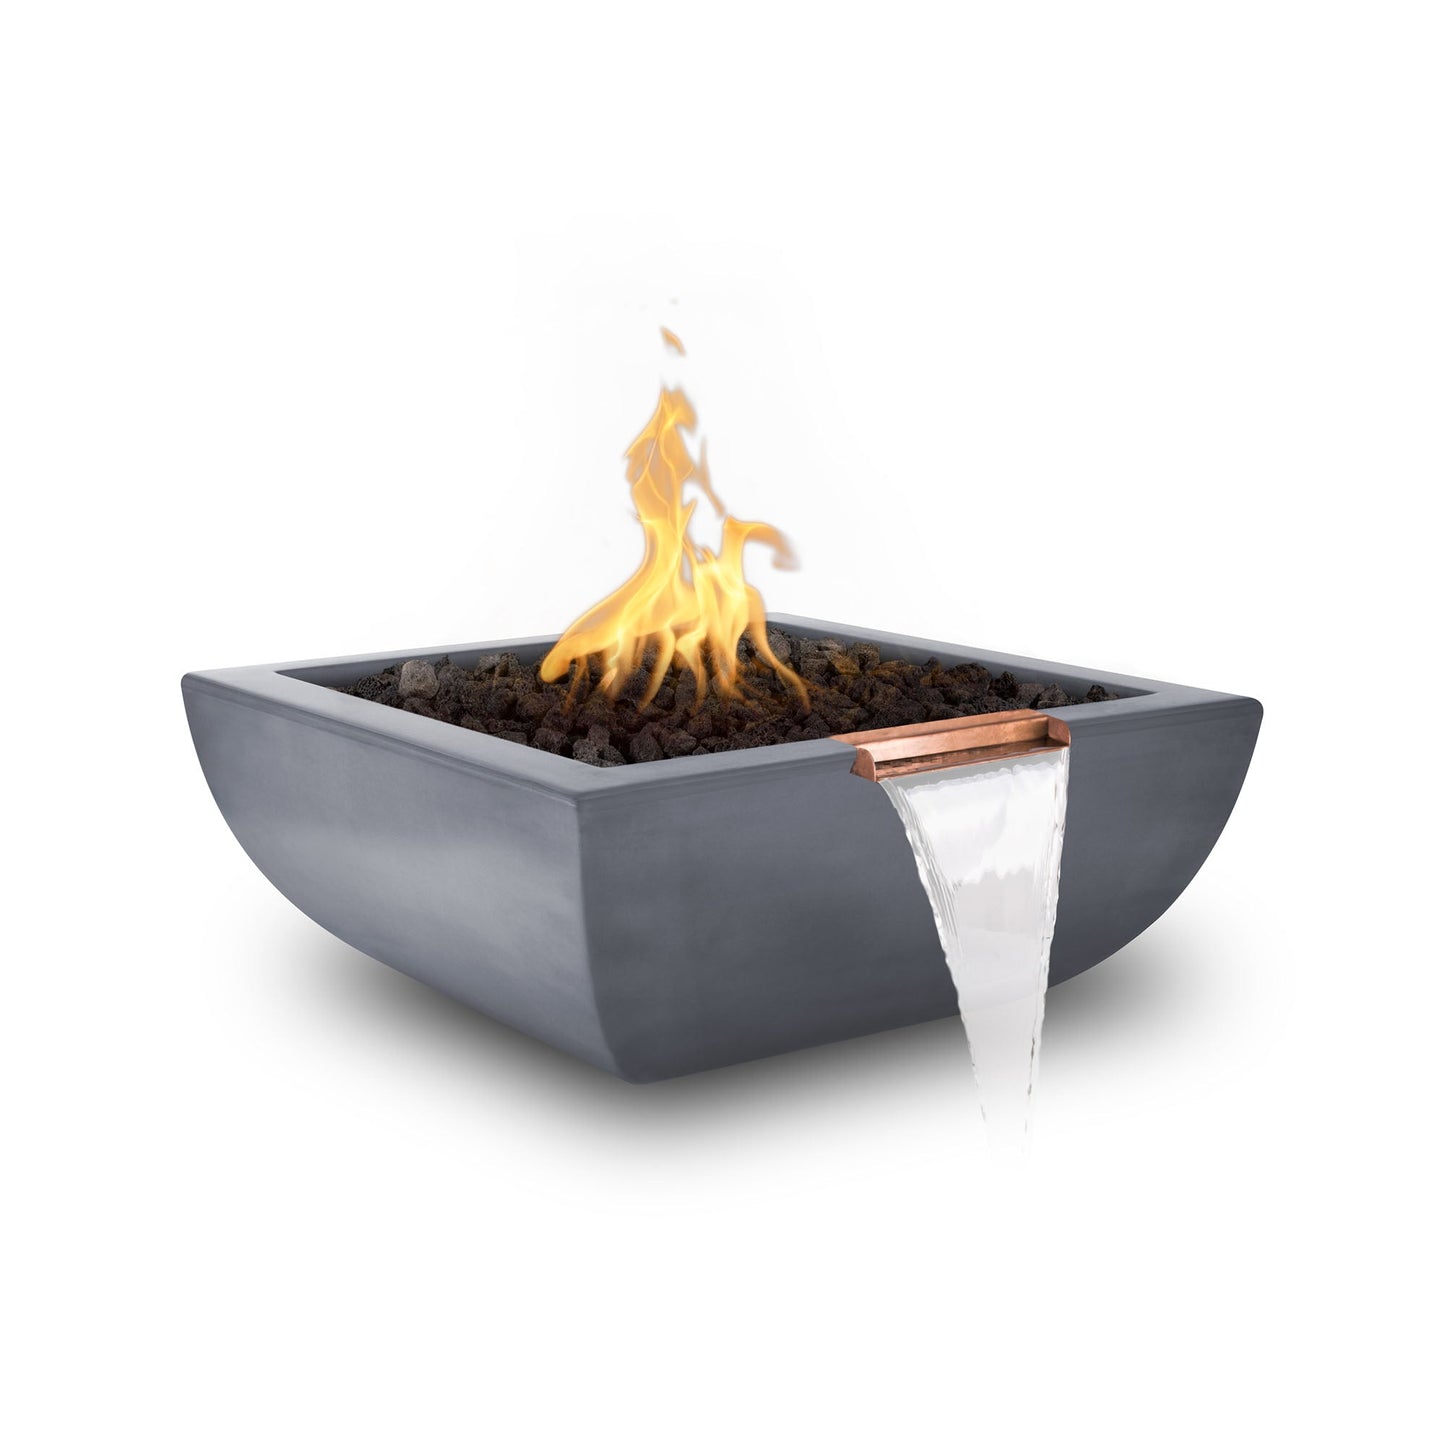 The Outdoor Plus Square Avalon 30" Vanilla GFRC Concrete Natural Gas Fire & Water Bowl with Match Lit with Flame Sense Ignition